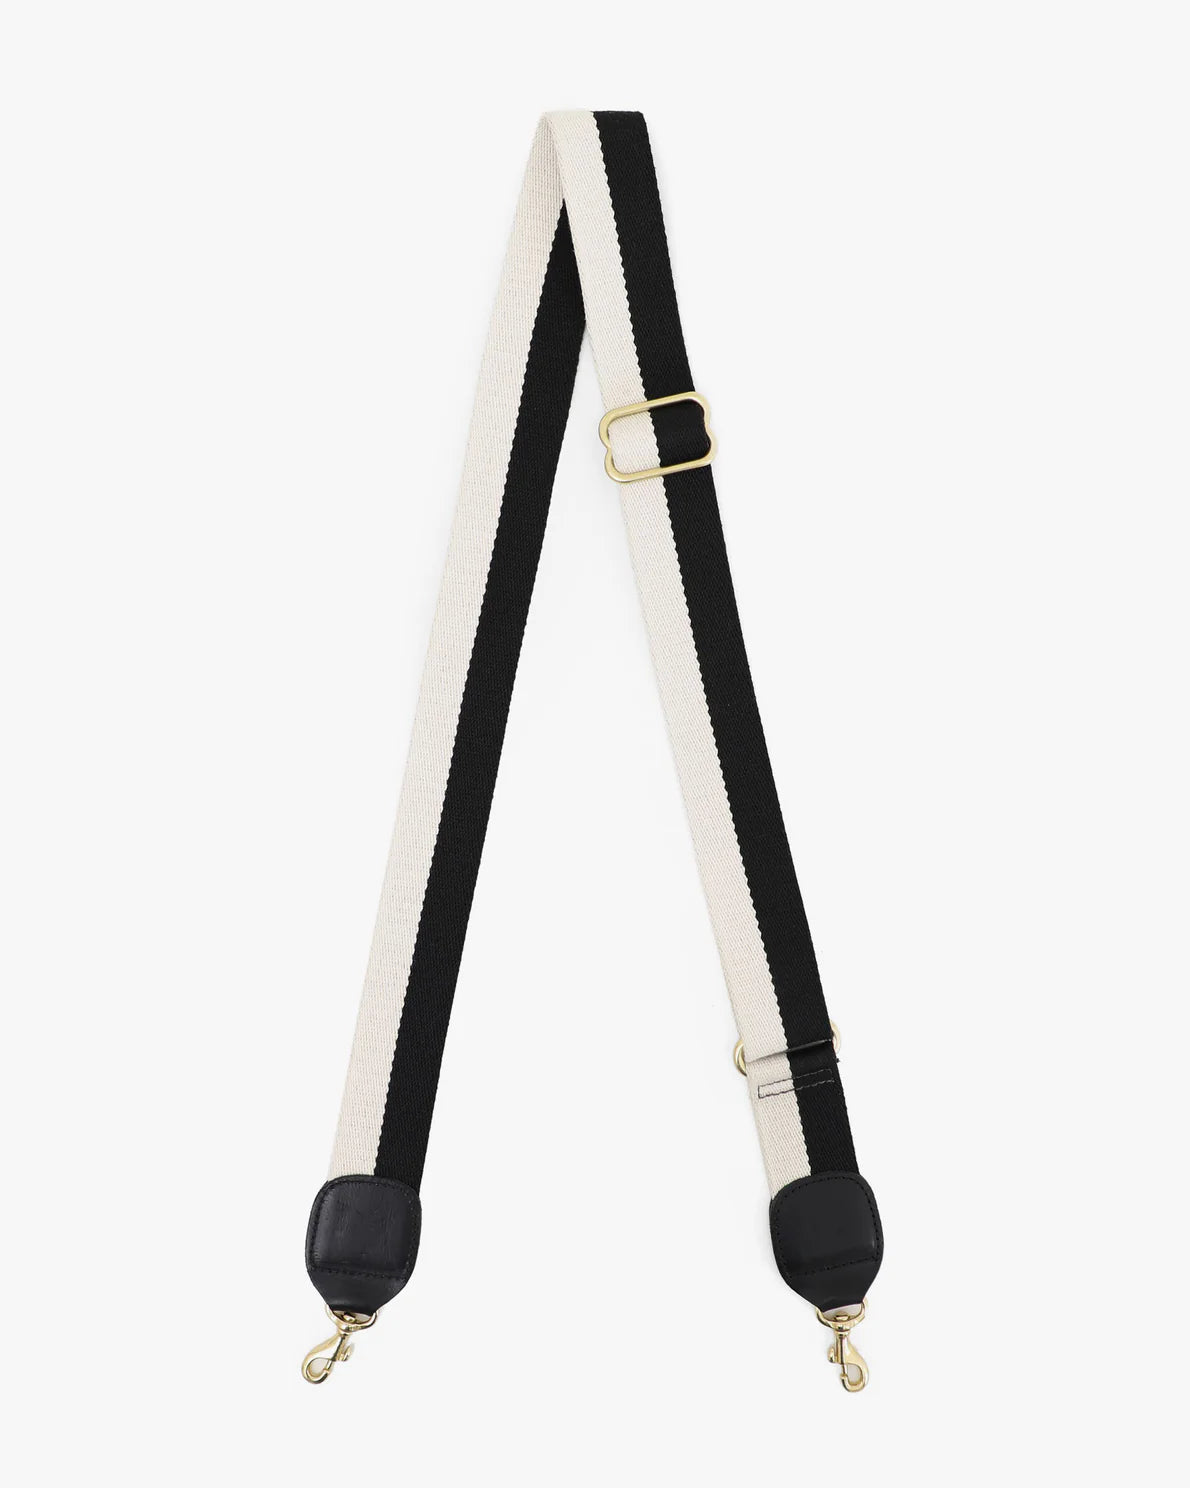 A black and white striped shoulder strap made from durable nylon webbing, featuring gold metal clasps at both ends and an adjustable gold buckle in the middle. Perfect for a crossbody bag or shoulder bag, the Crossbody Strap from Clare Vivier is laid flat on a white background.